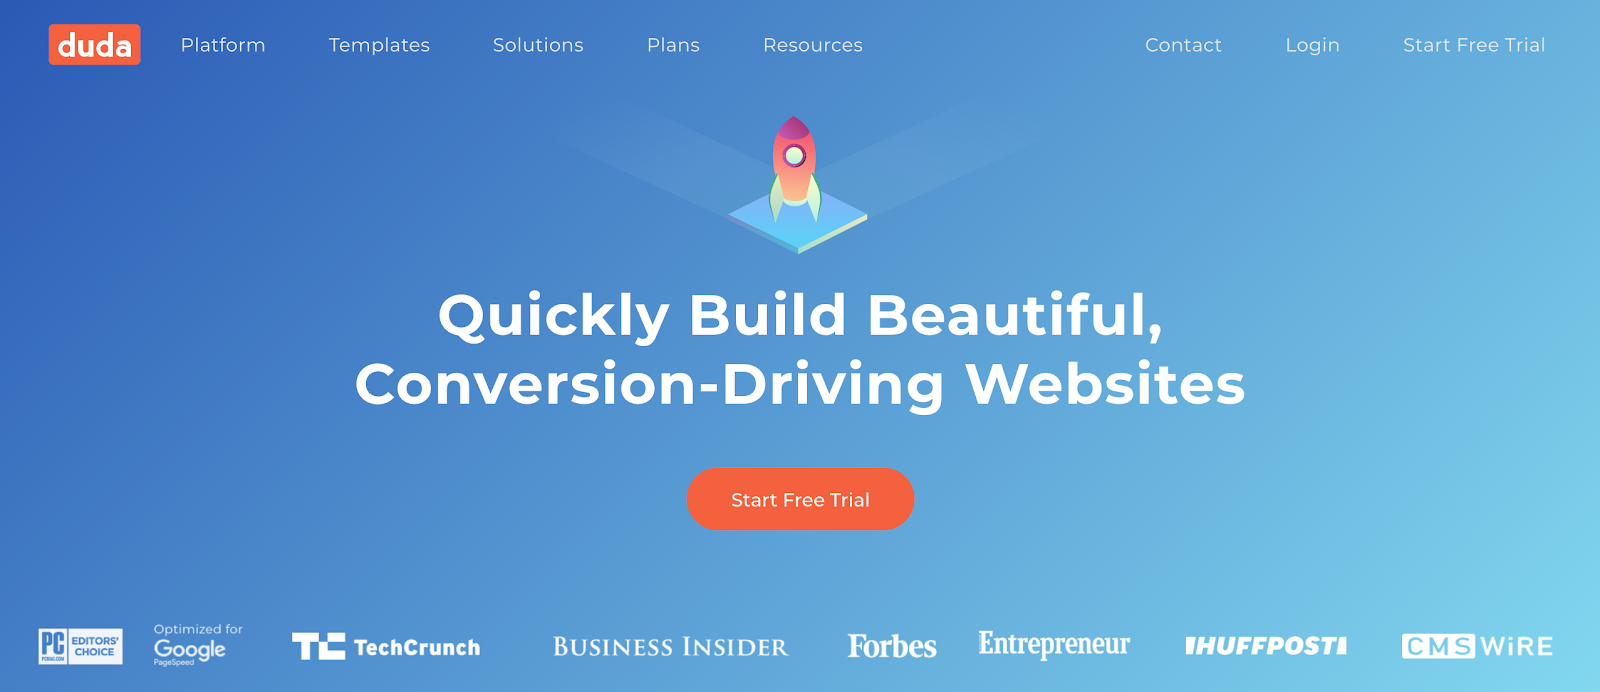 Duda, another powerful alternative to Squarespace